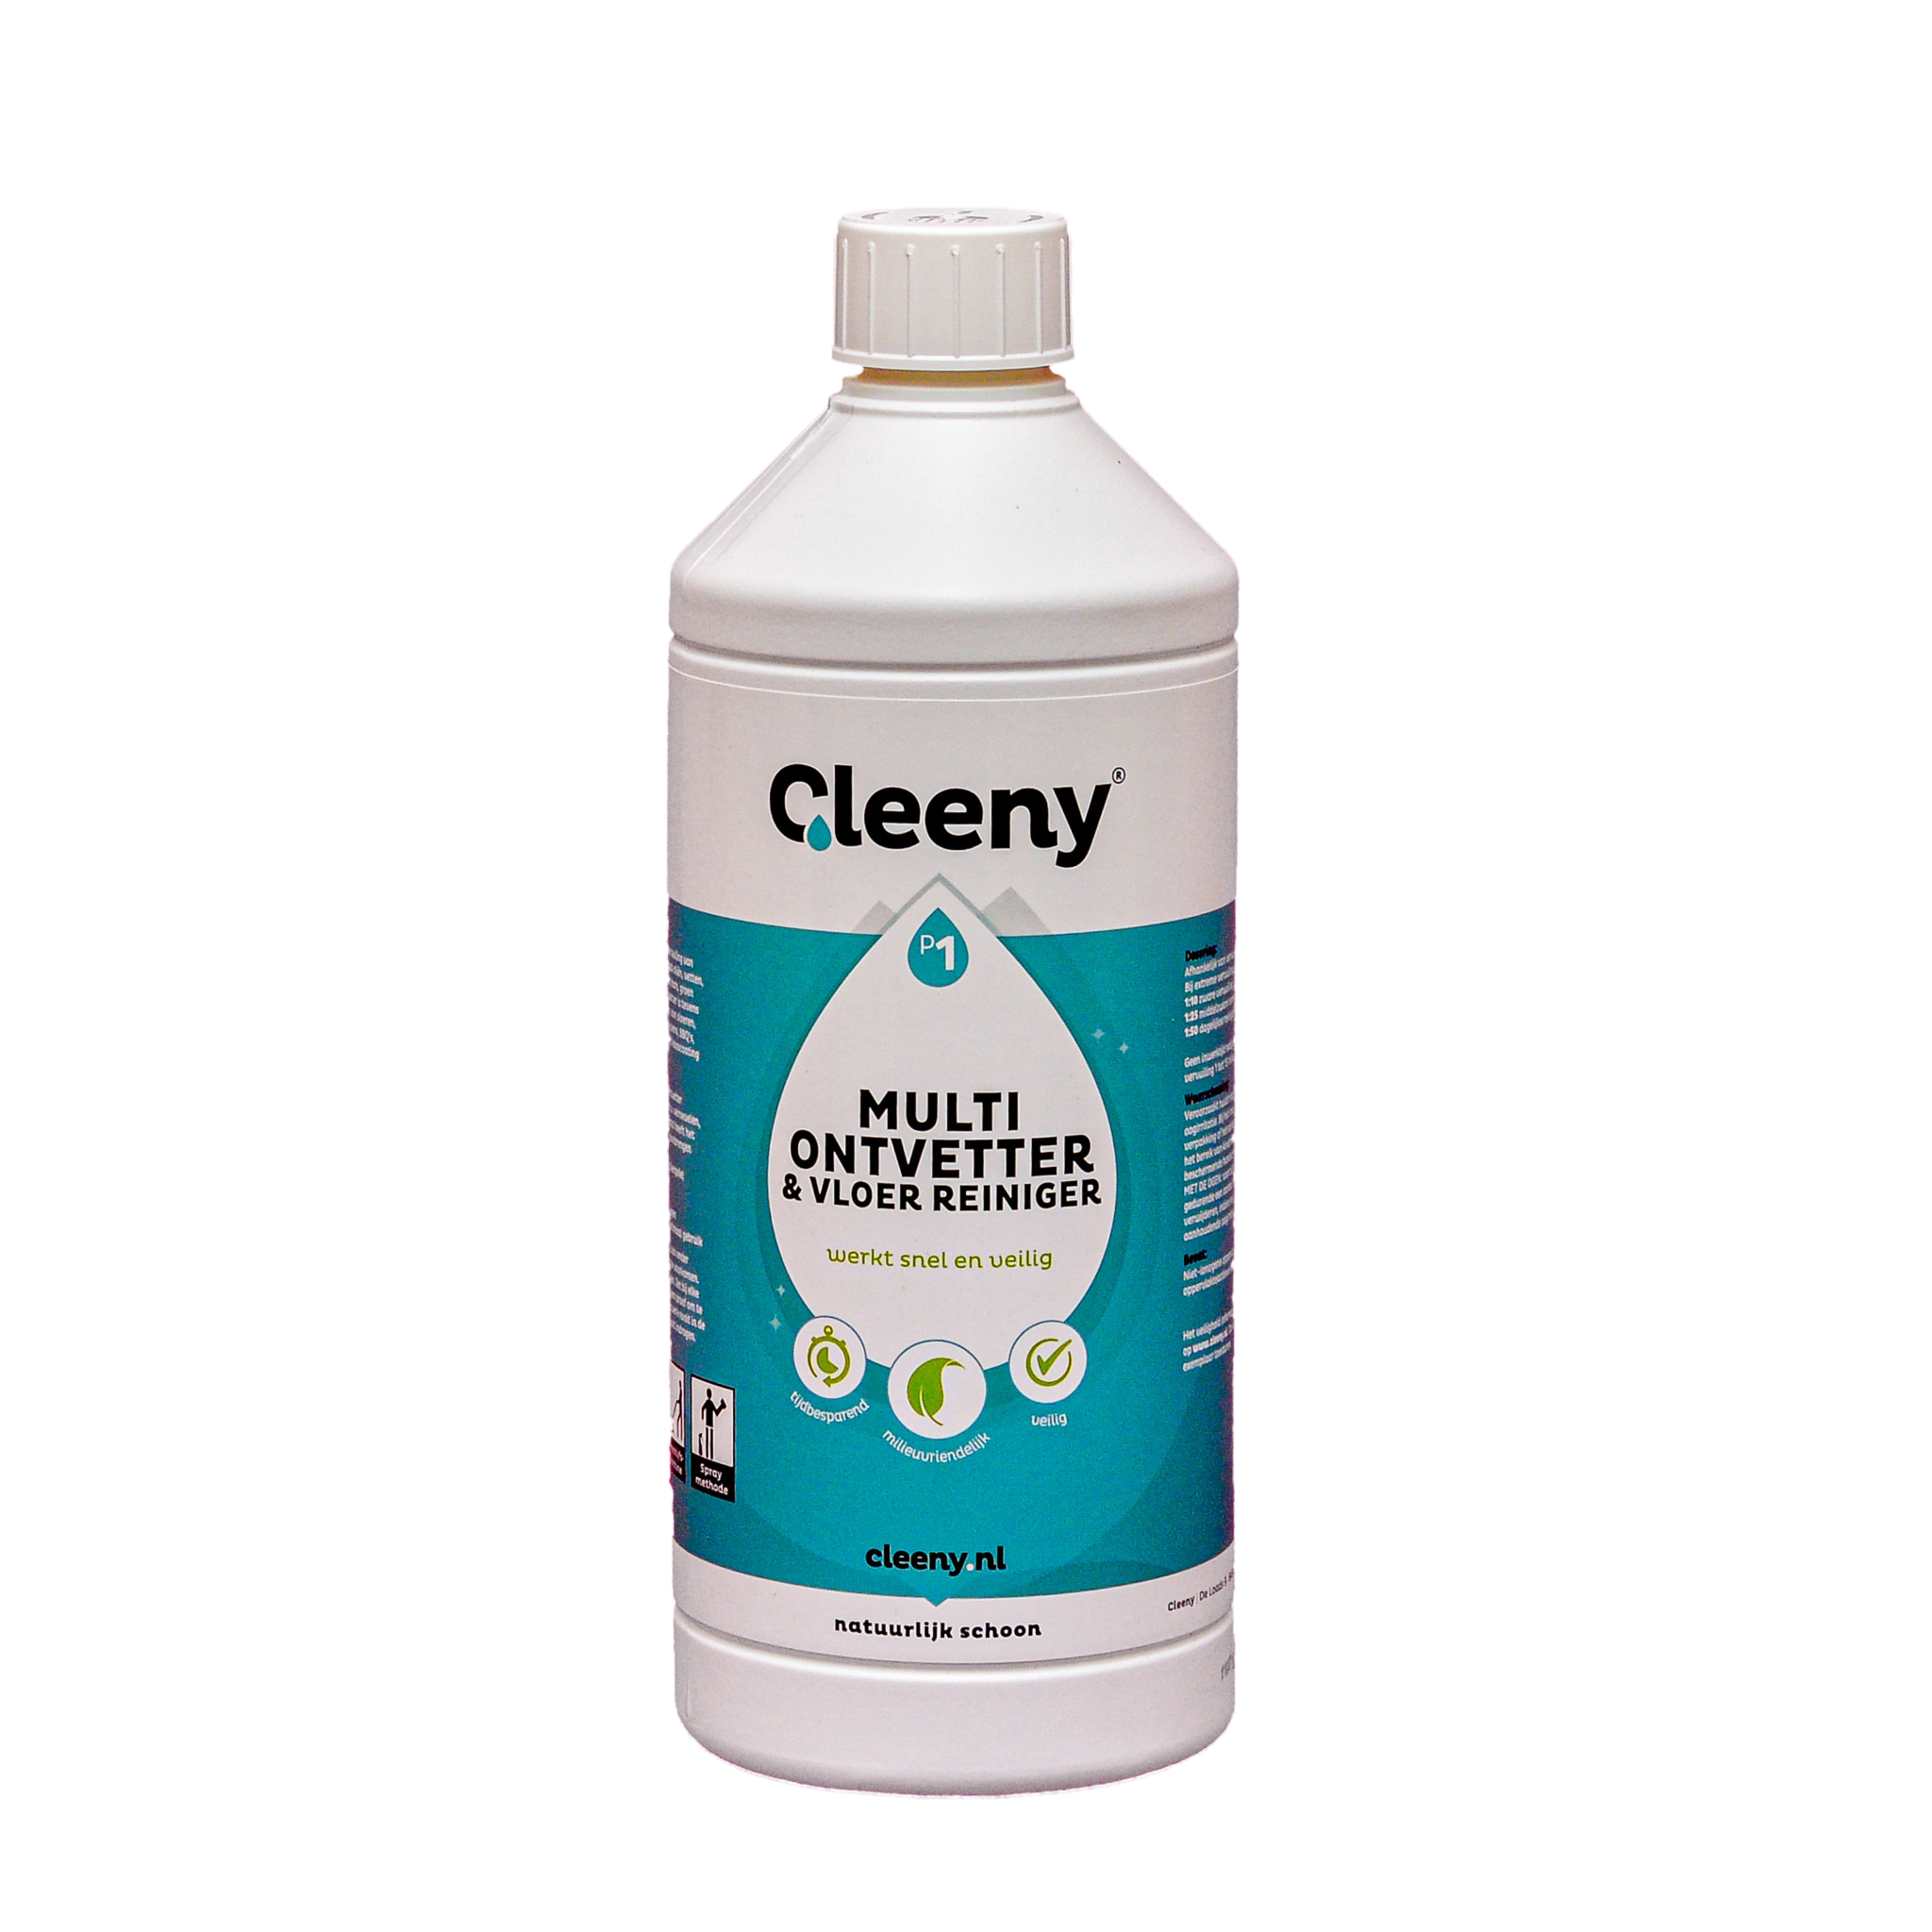 Cleeny Cleeny P1 degreaser, 1 liter bottle of concentrate